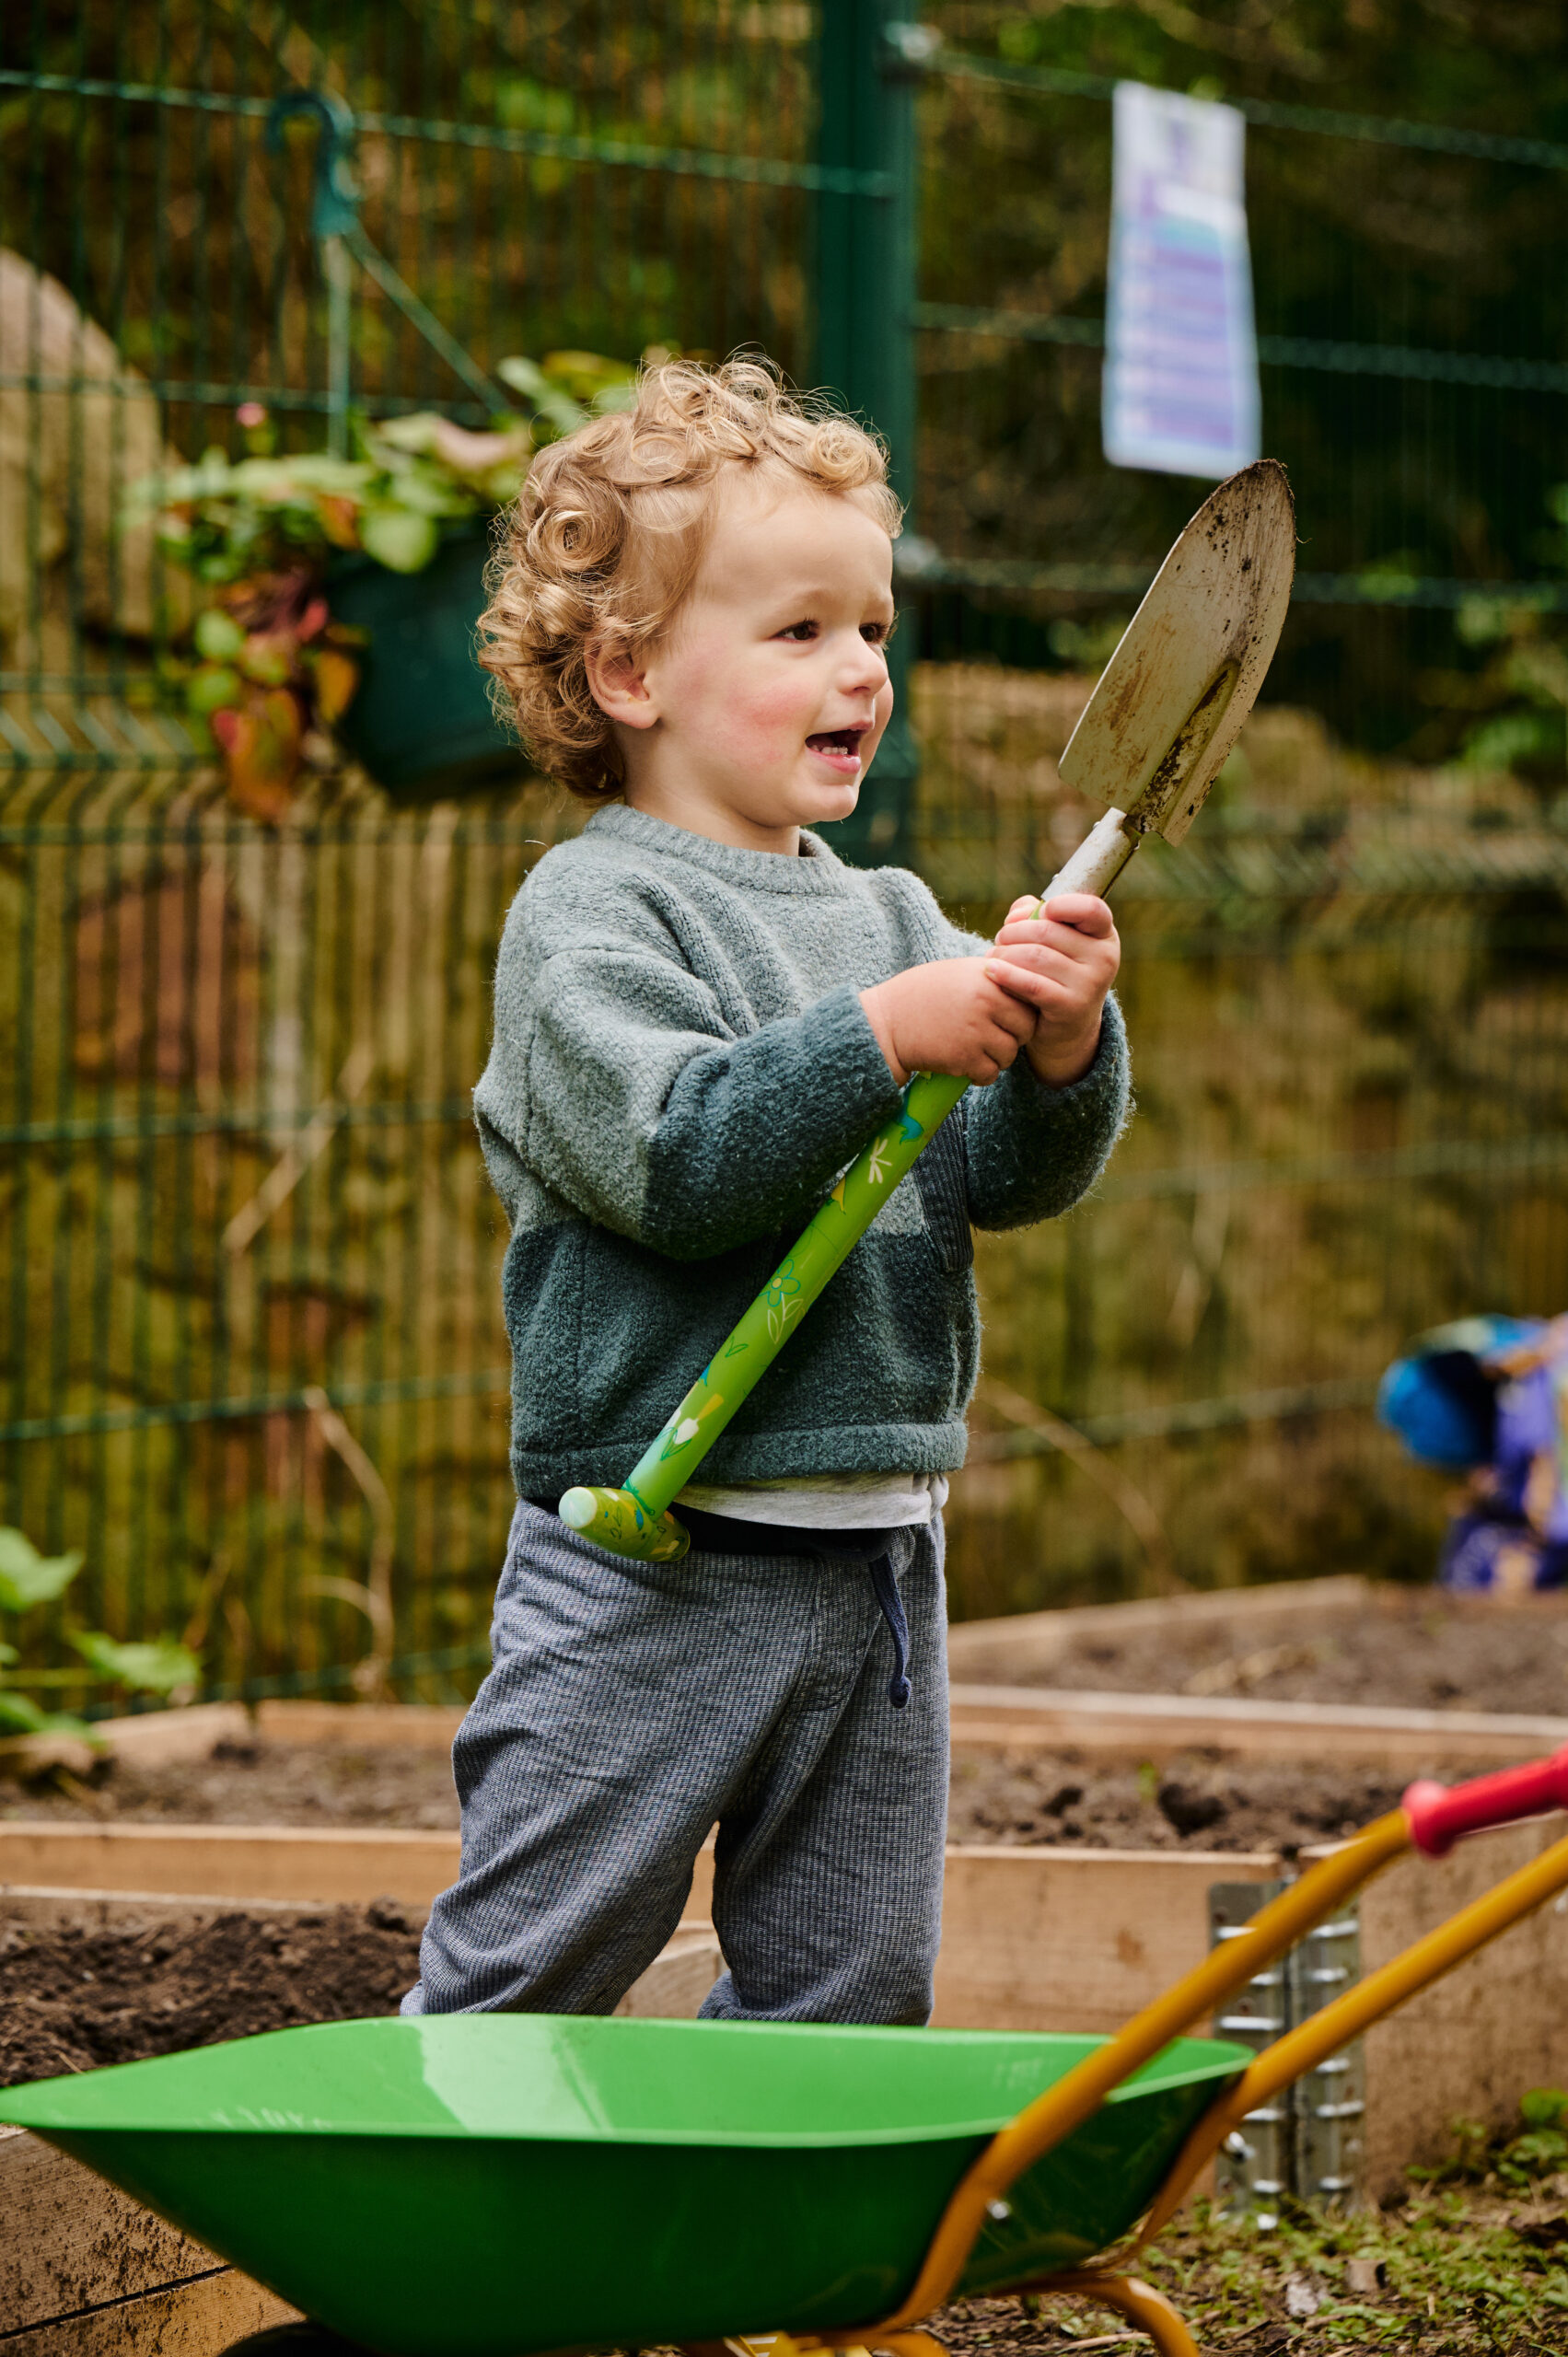 boy with curly hair is holding a spade and getting ready to do some digging